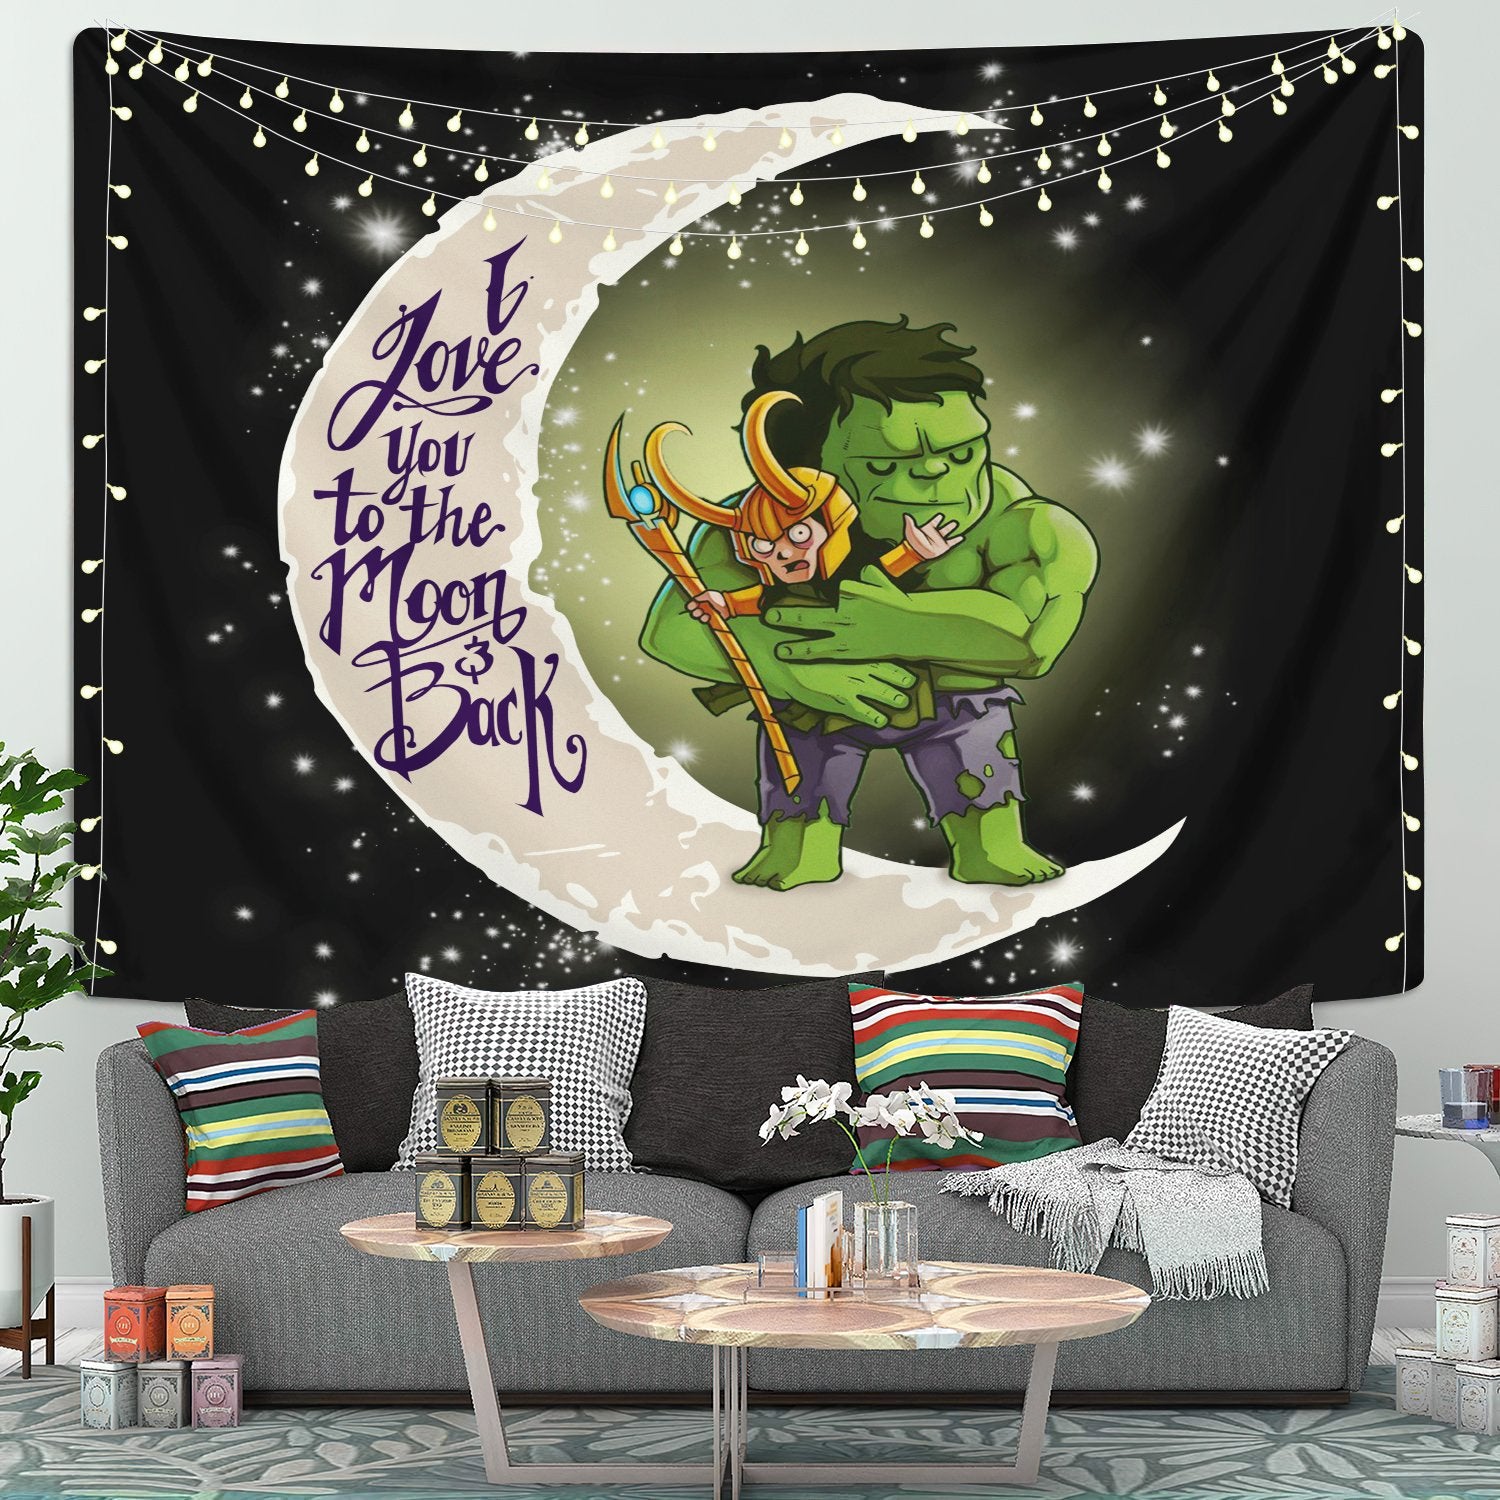 Hulk And Loki Love You To The Moon Tapestry Room Decor